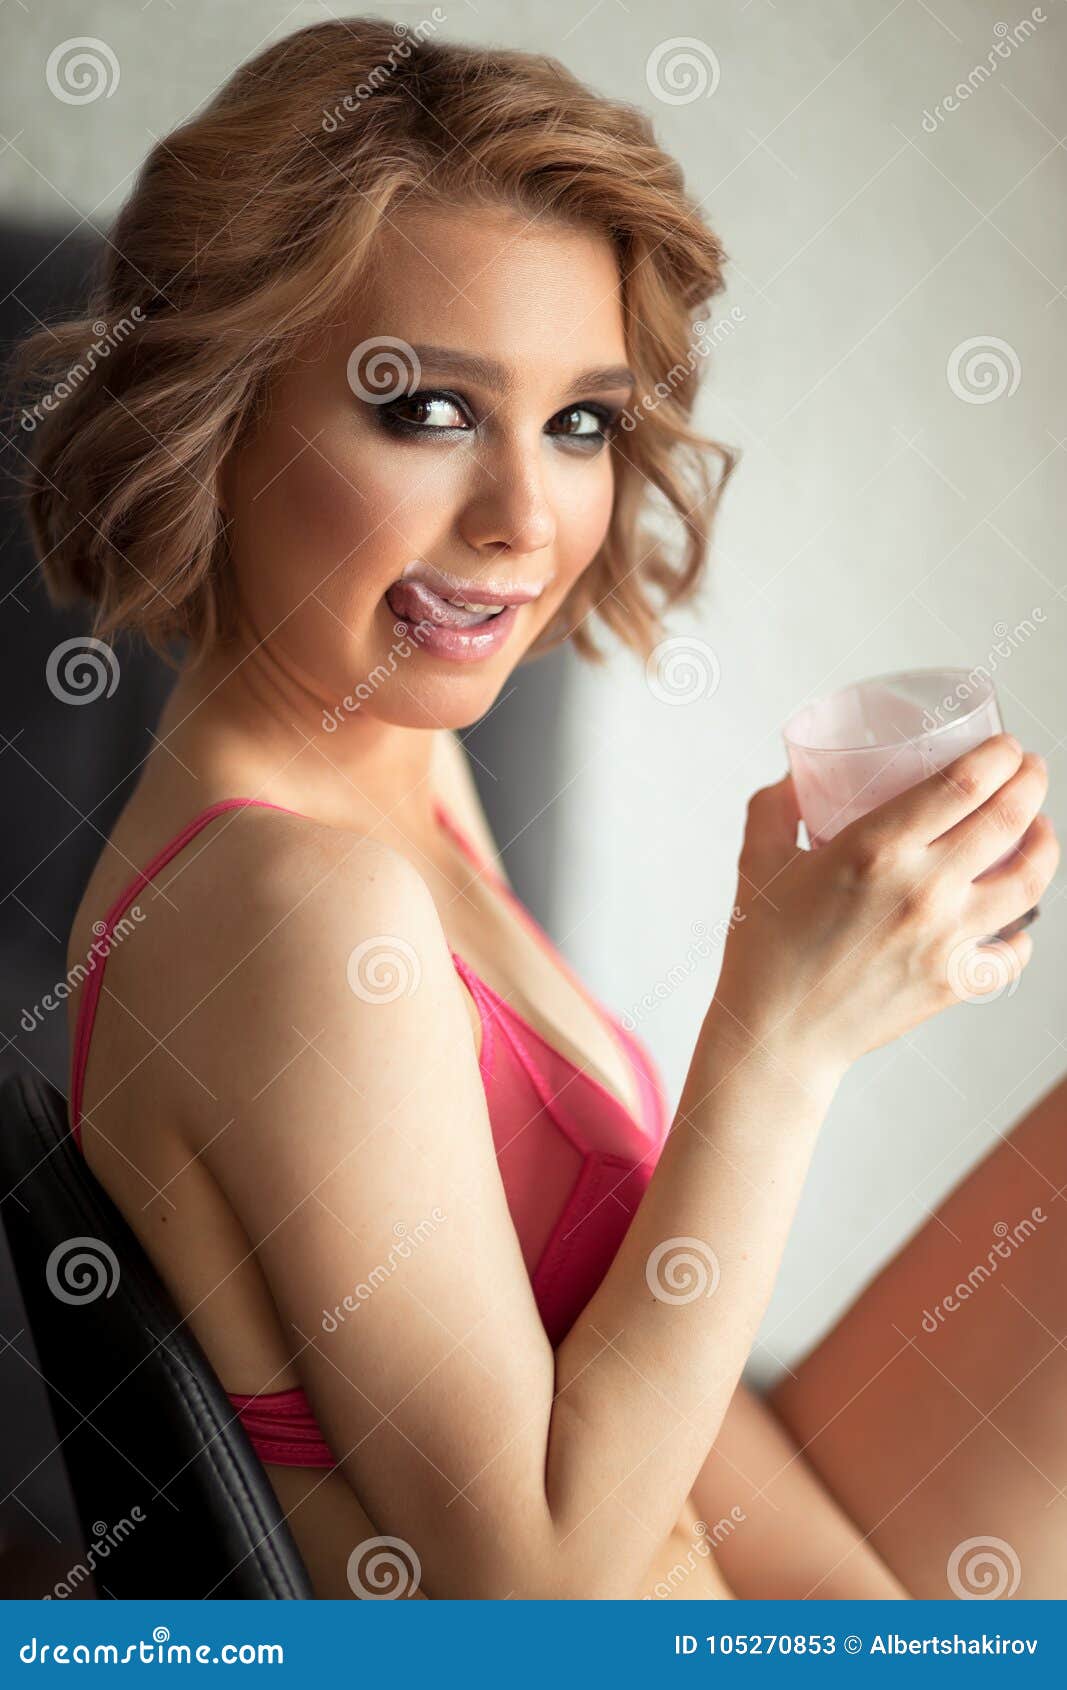 Woman in Lingerie in a Bar with Cocktail - Focus on the Face and the Drink  Stock Image - Image of drink, figure: 105270853